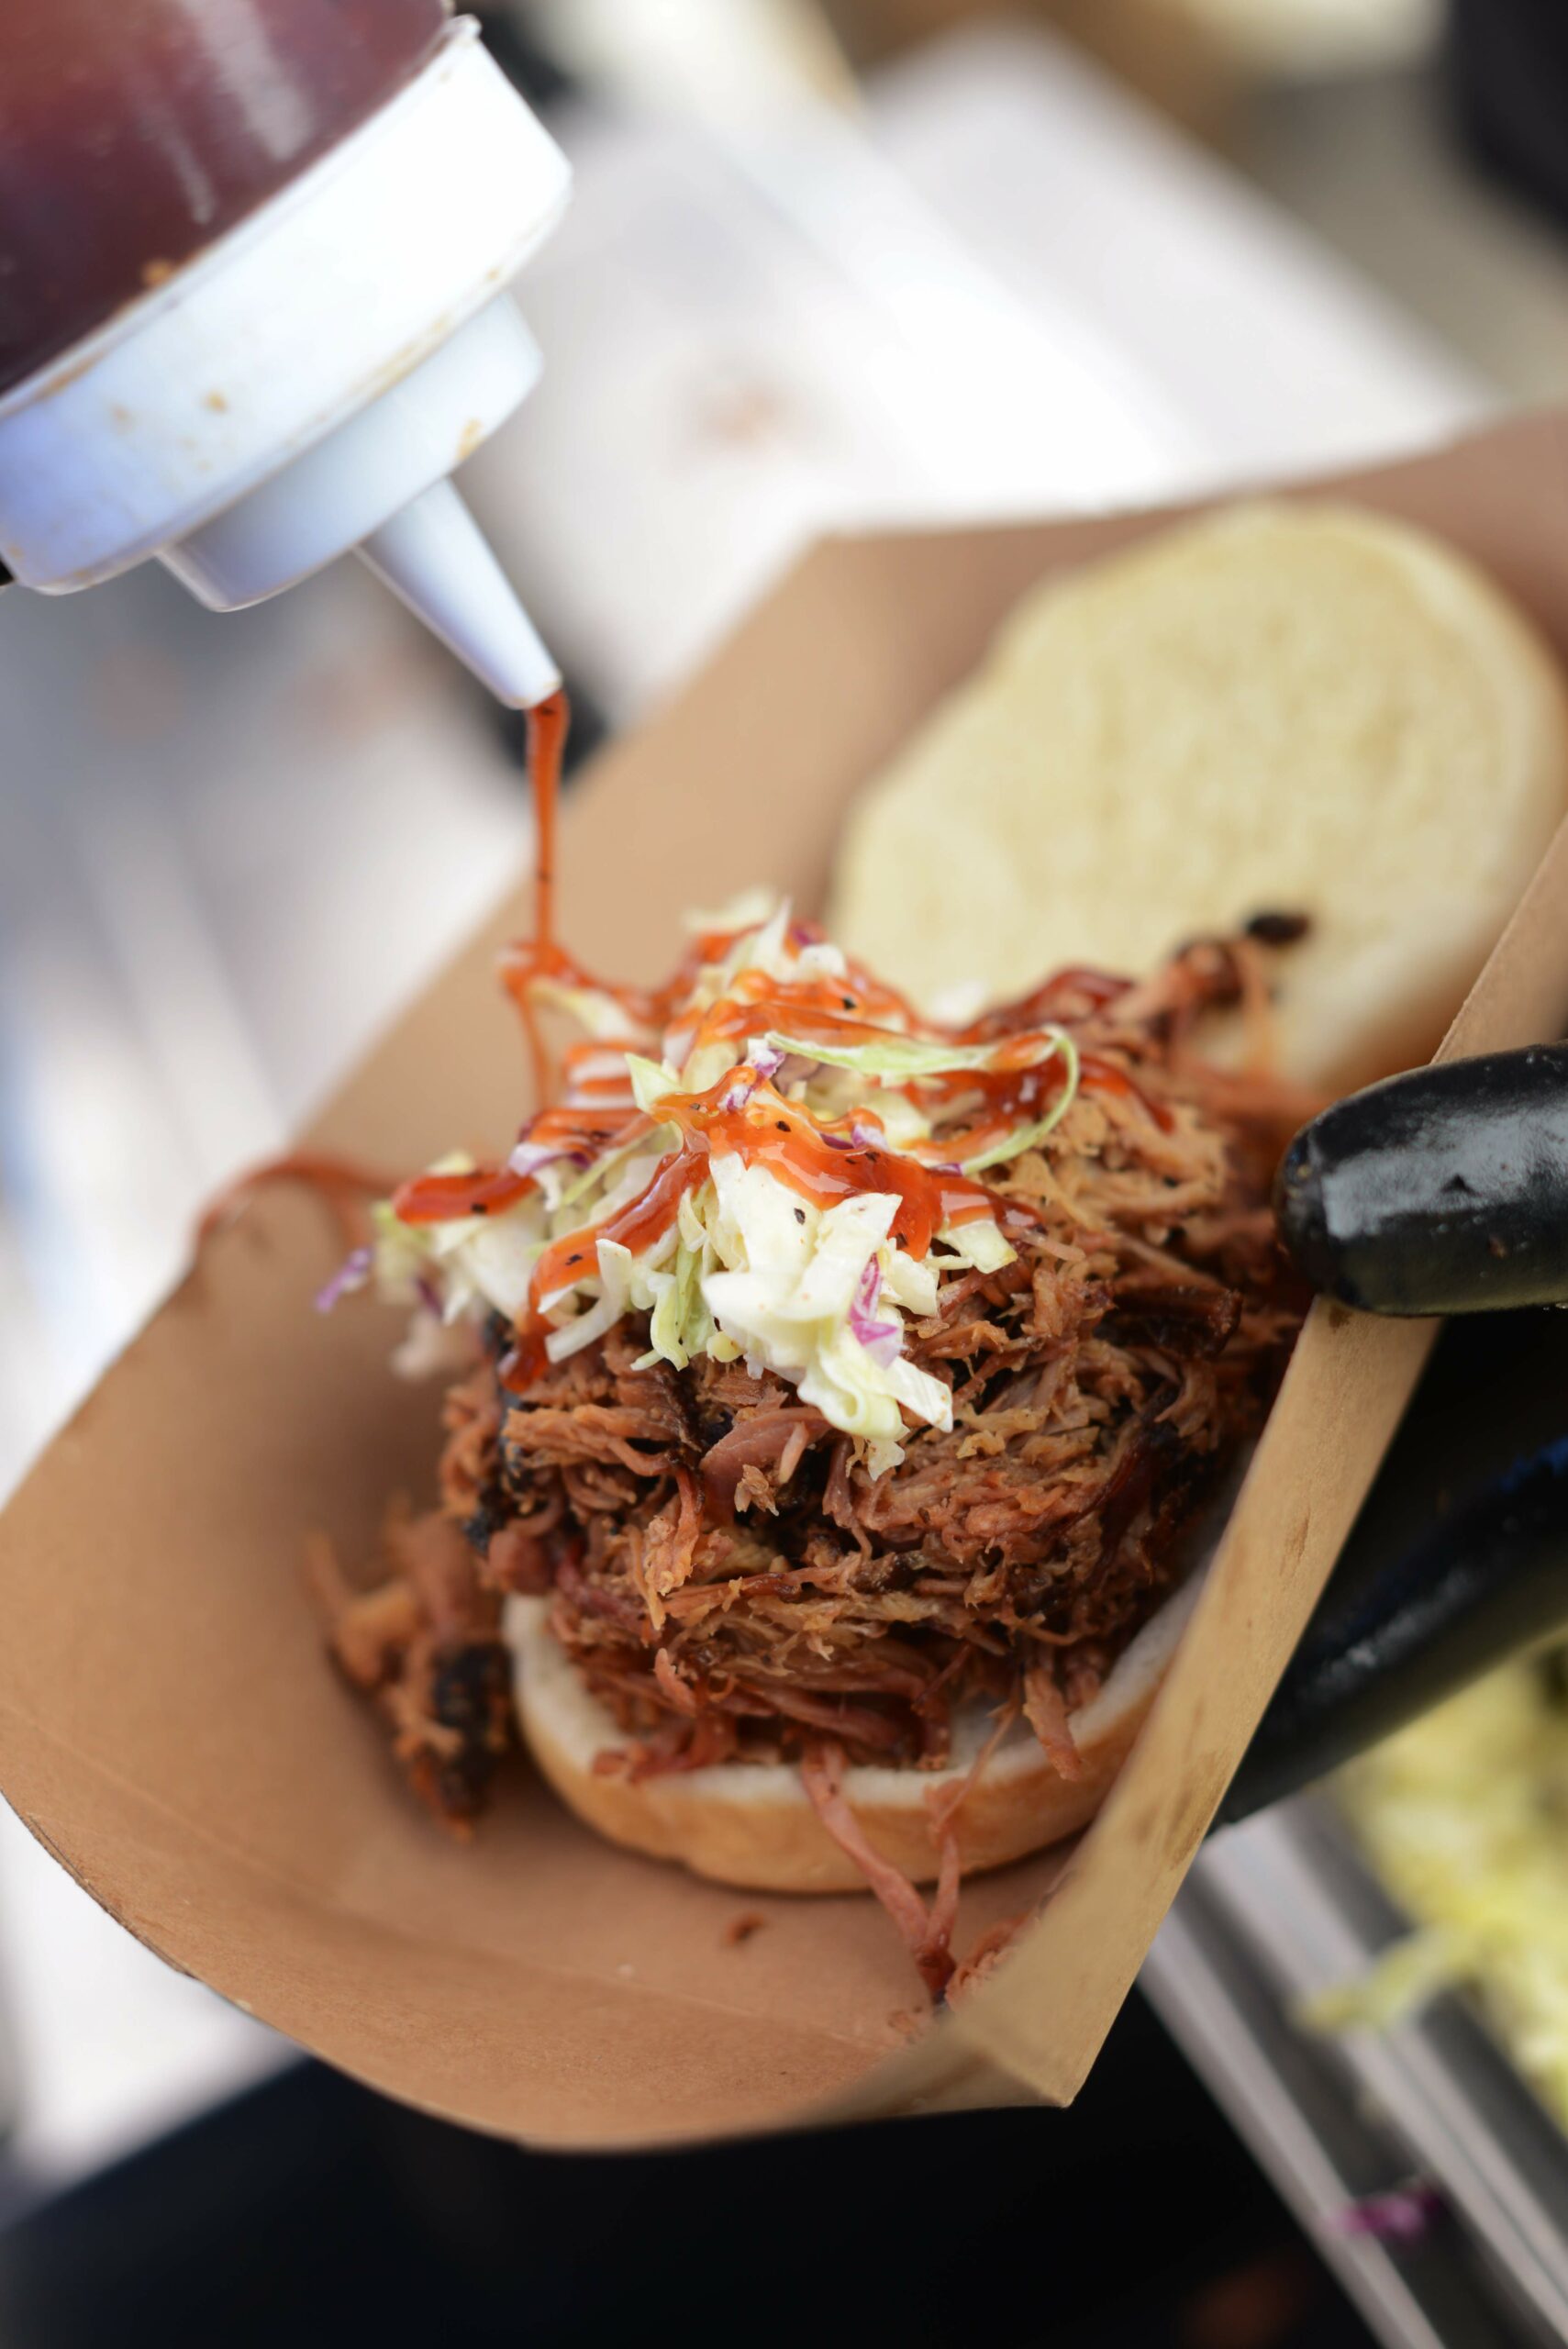 A pulled pork sandwich prepared by Camacho's during the RateBeer Best International Beer Festival held at the Sonoma County airport on Sunday, Jan. 31, 2016. (Erik Castro / for The Press Democrat)